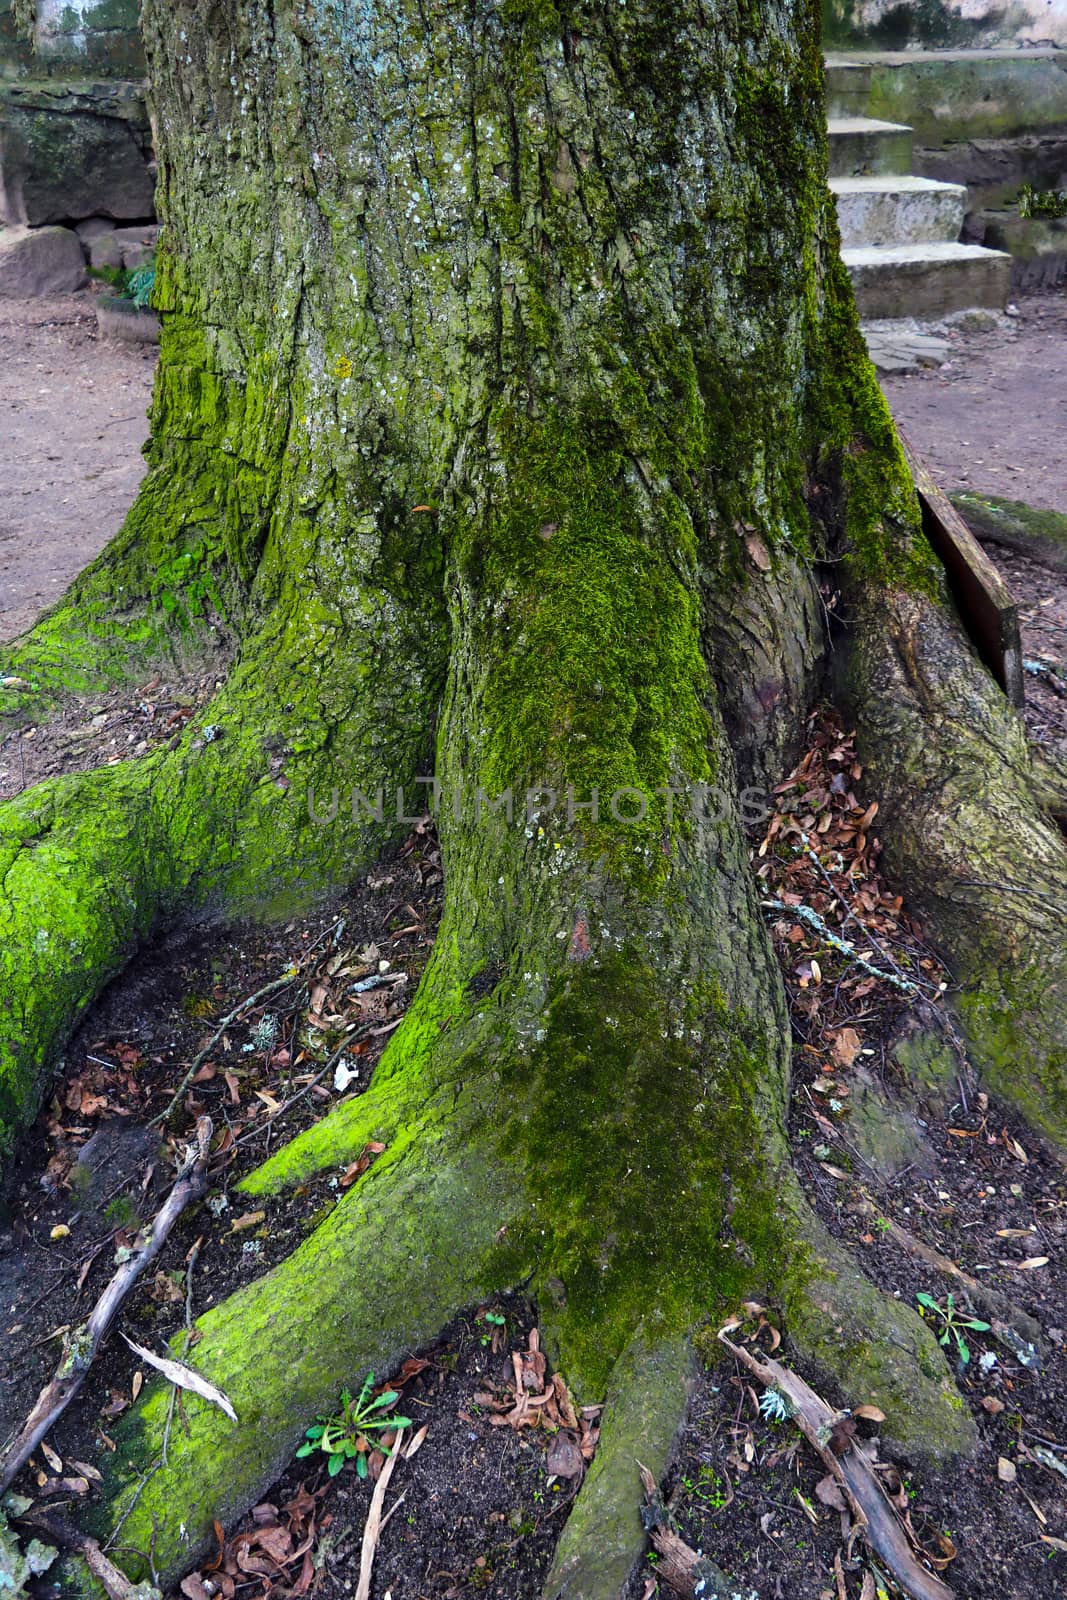 Large roots of an old tree. The trunk of the tree is covered with green moss